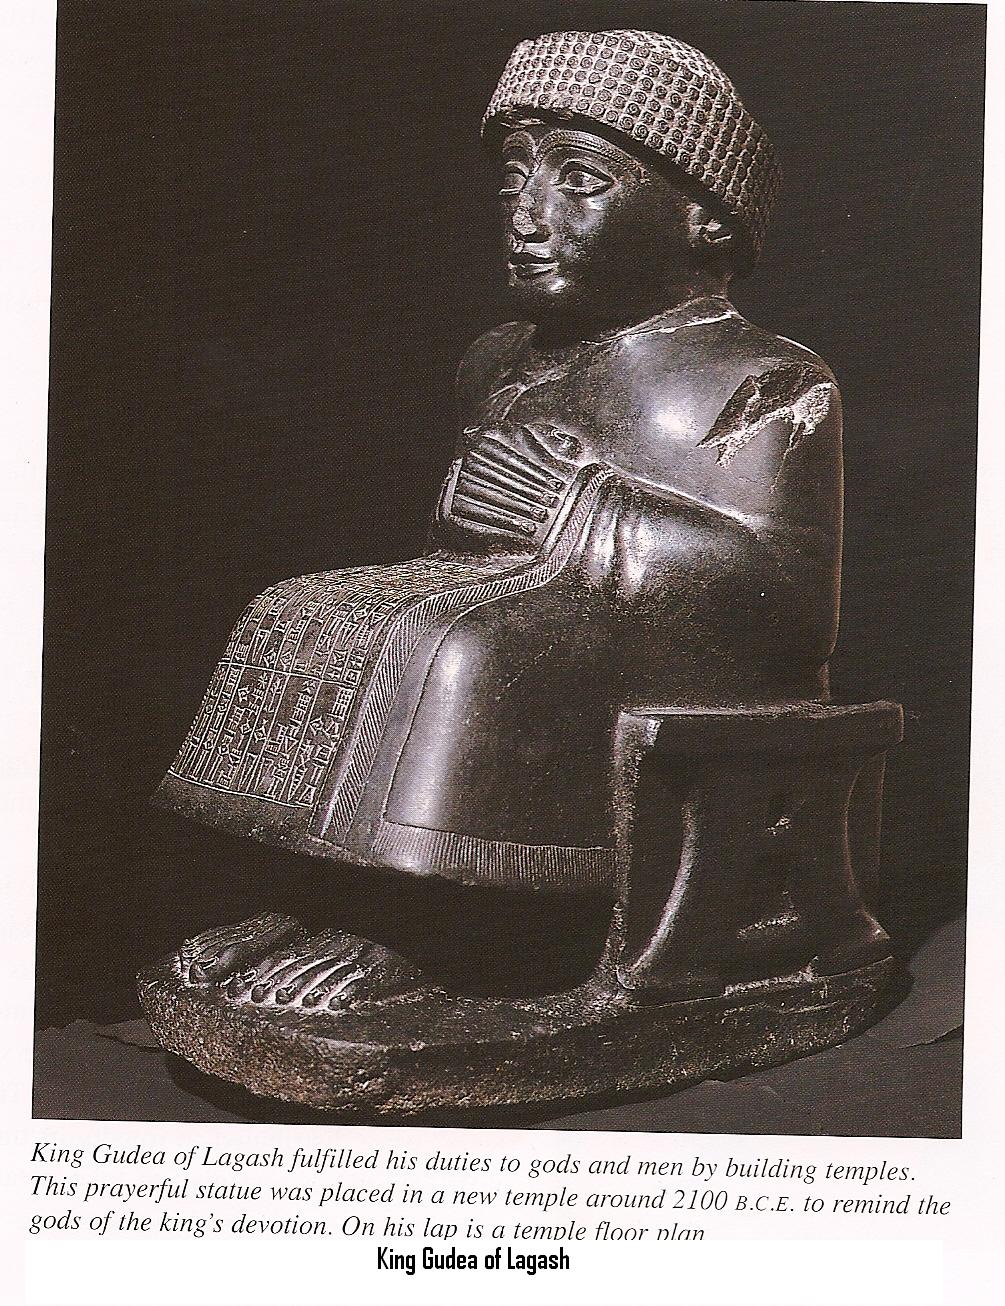 8g - giant powerful 2/3rds divine King Gudea of Lagash, protected son to goddess Ninsun